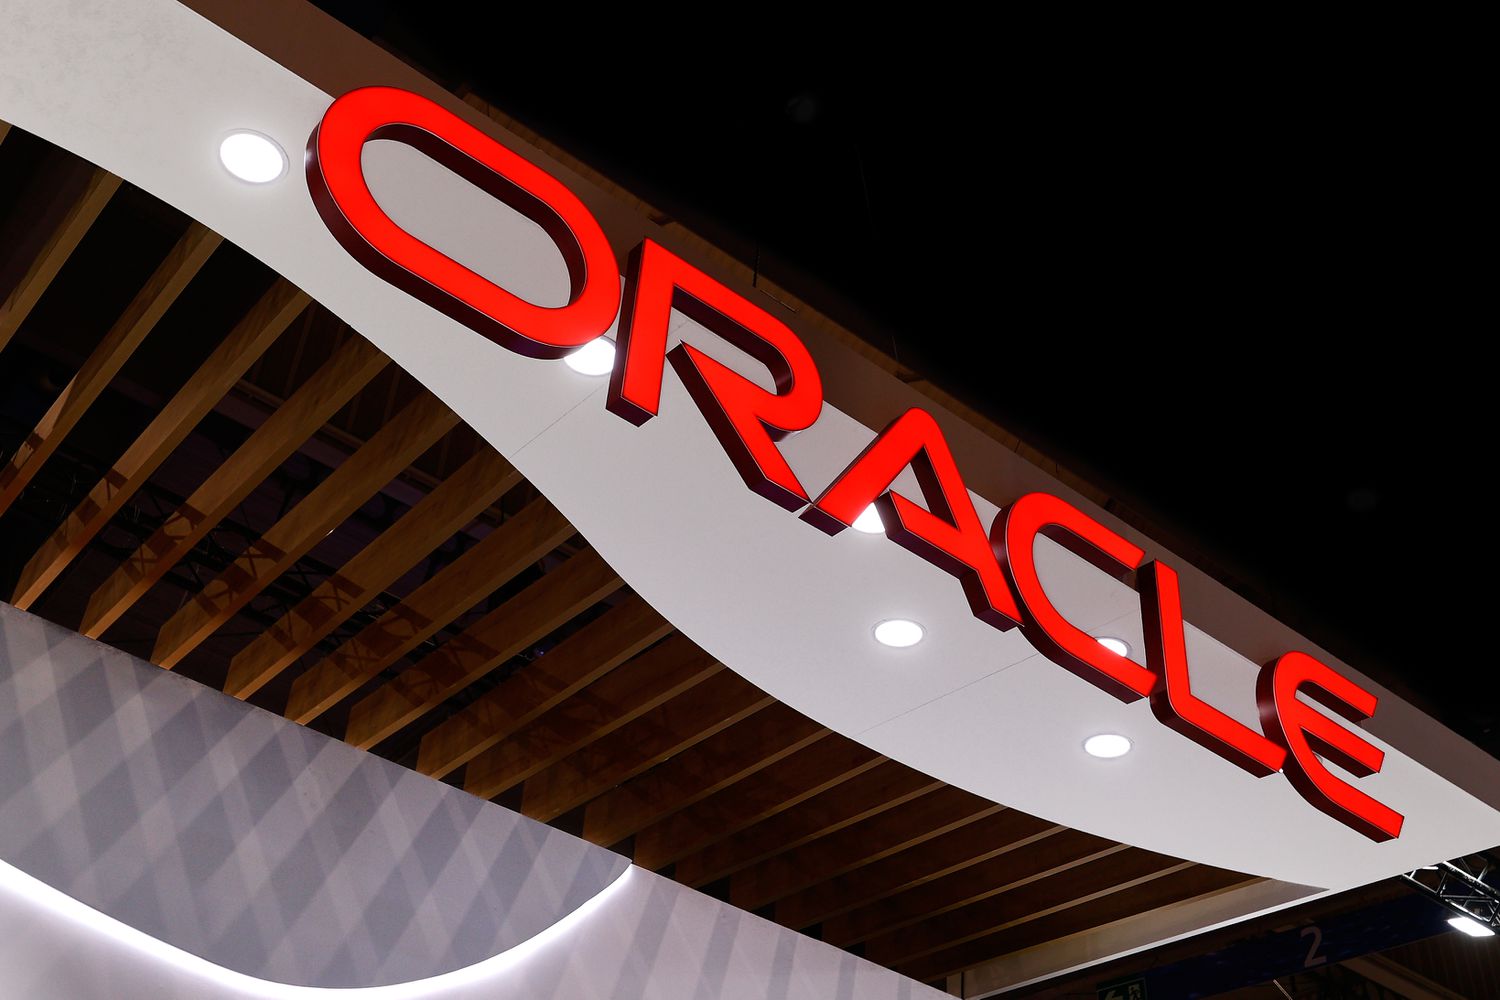 What You Need To Know Ahead of Oracle’s Earnings Report [Video]